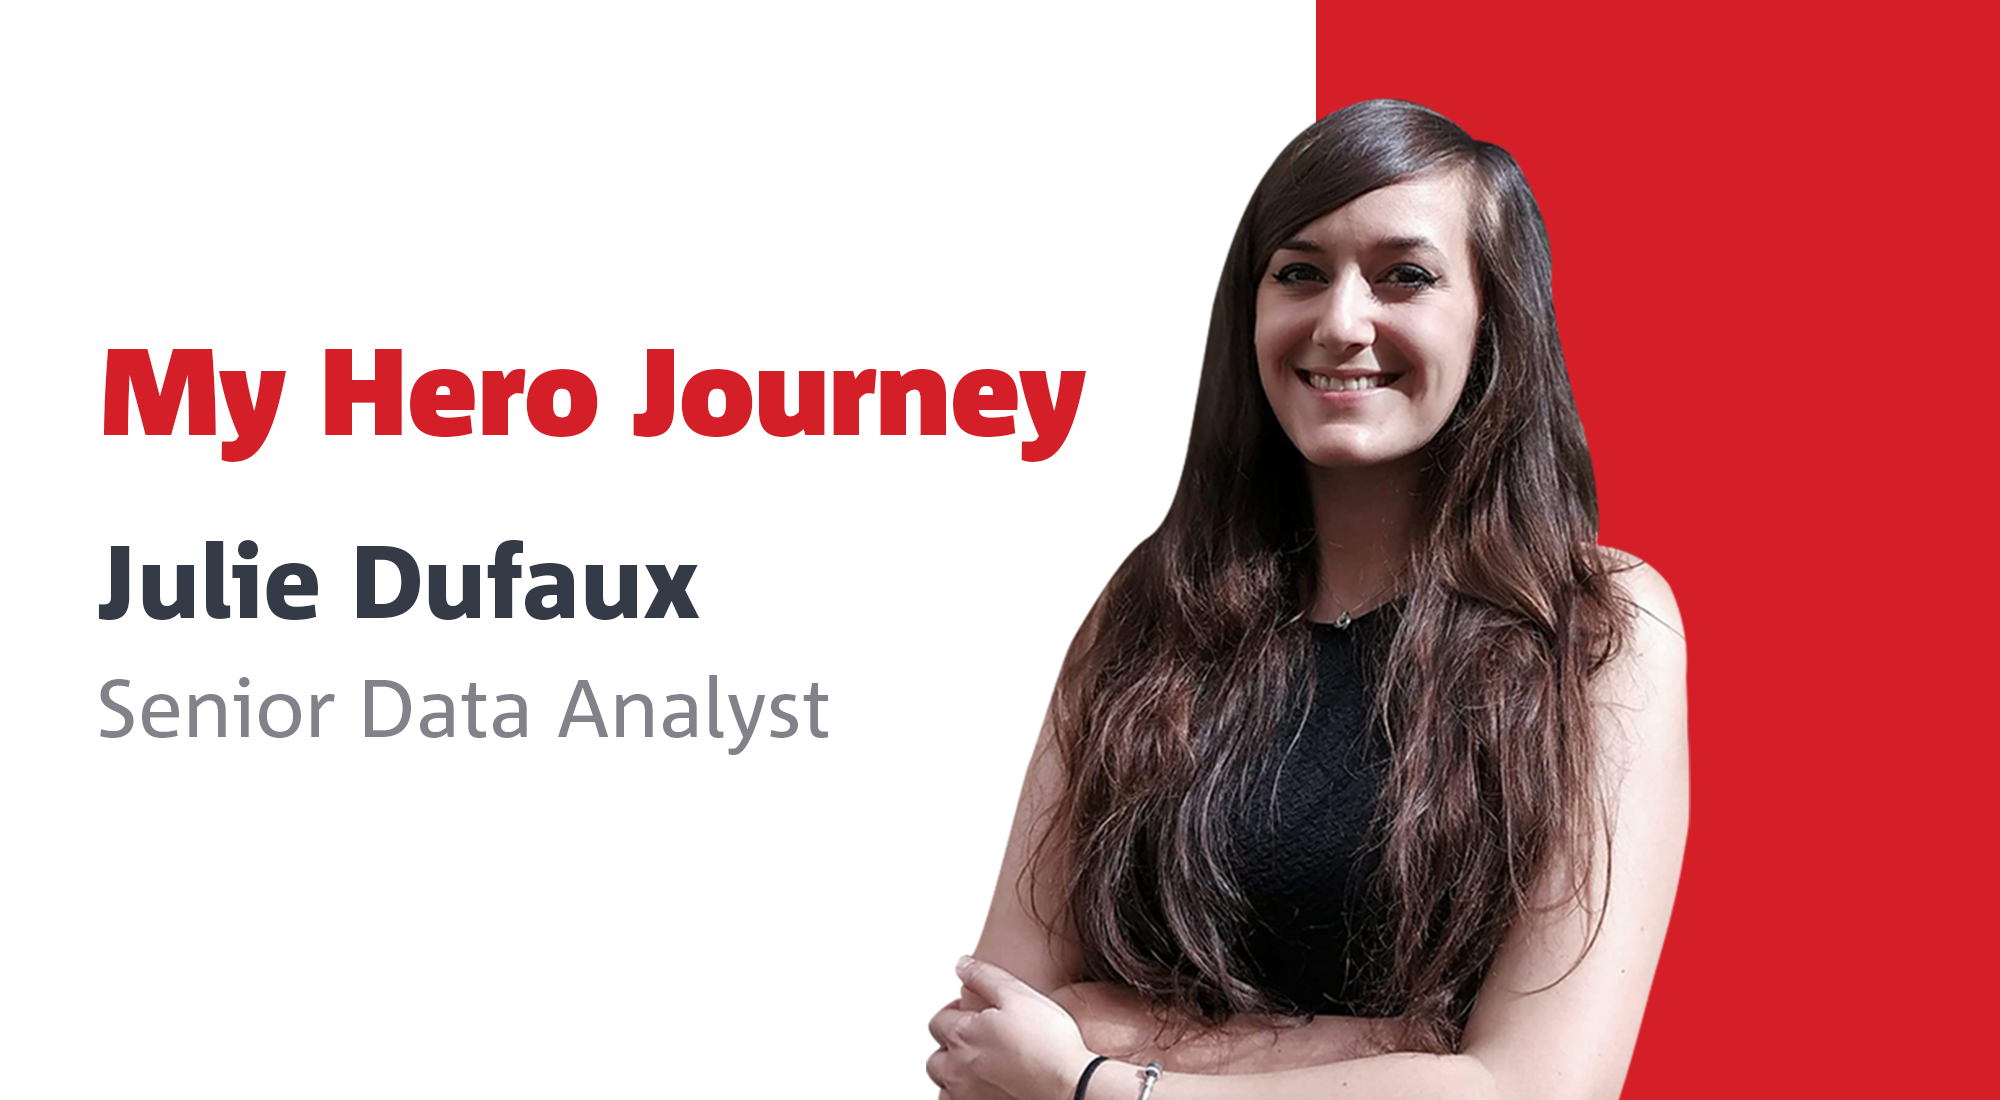 “I was ready to go the extra mile and grow fast”: insights from a Data Analyst